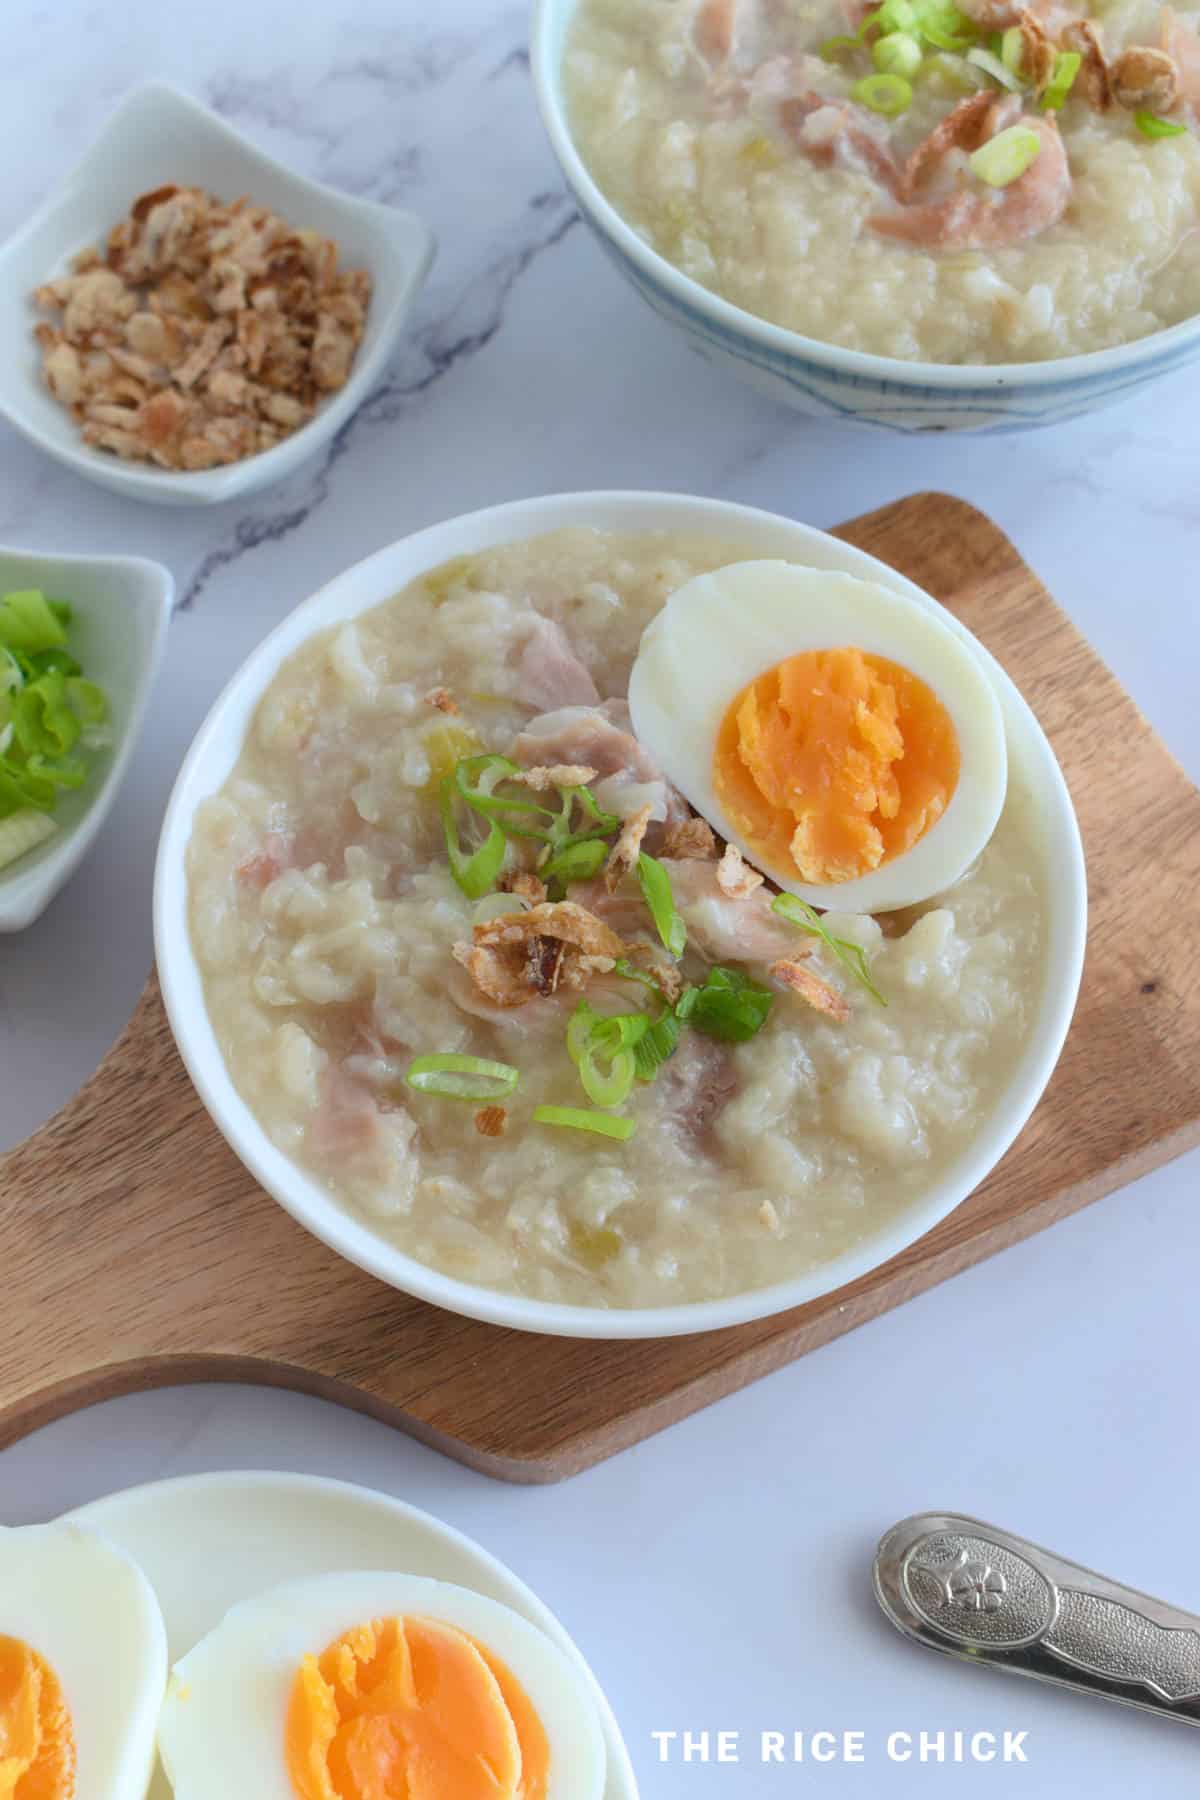 Rice porridge in a white bowl on a wooden board.